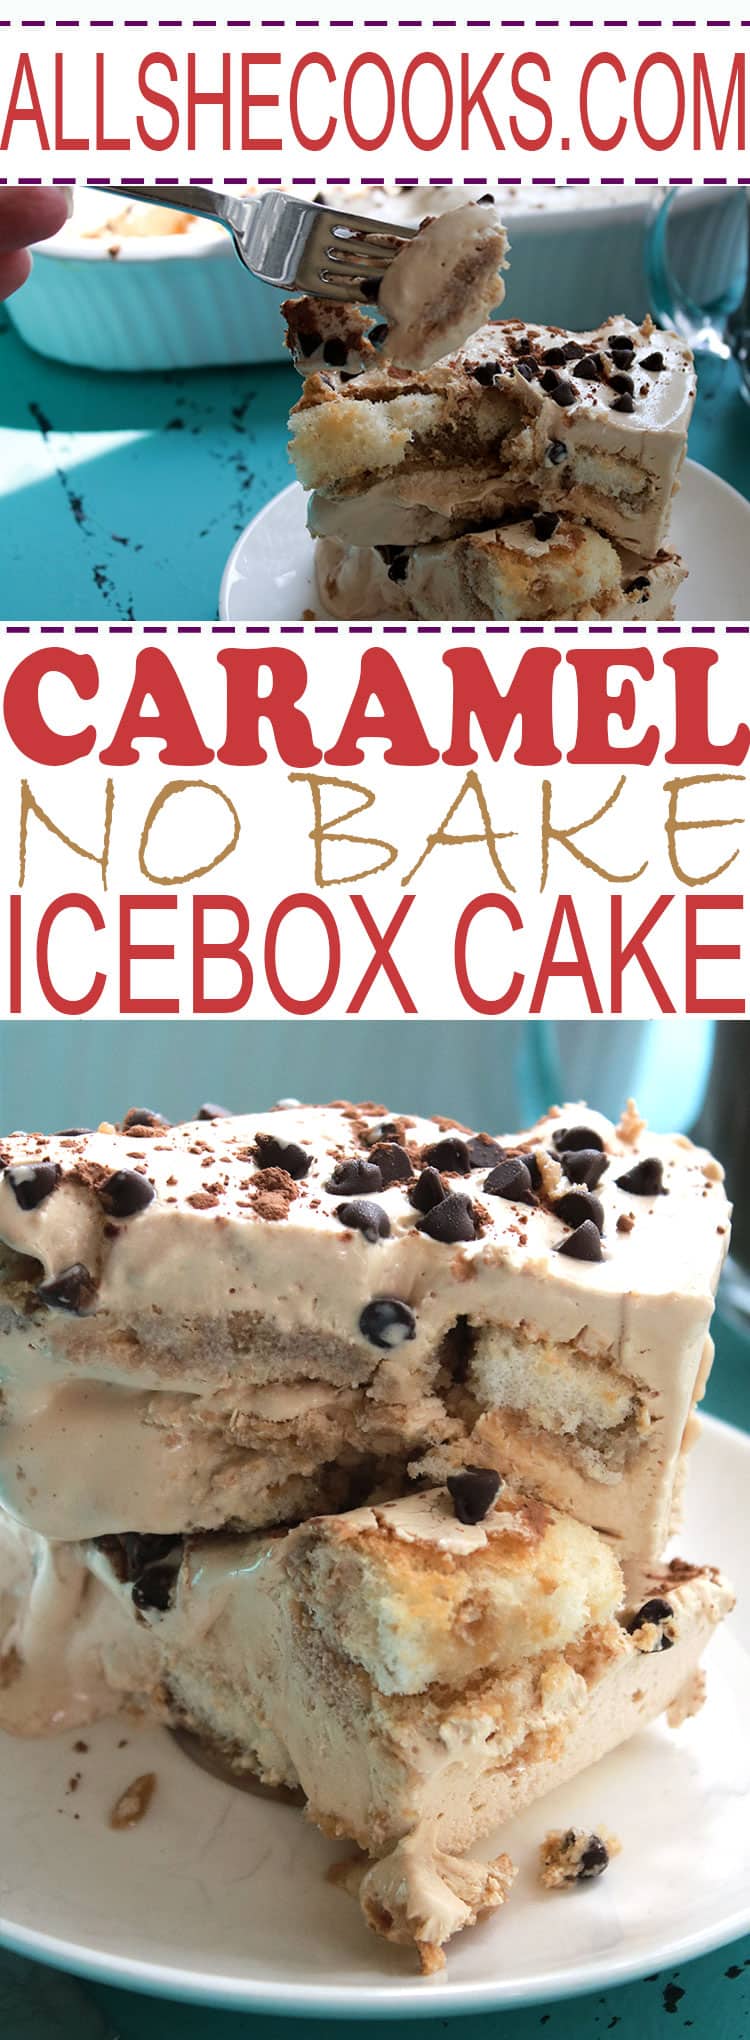 Caramel No Bake icebox Cake is an easy dessert recipe using Caramel One Touch Latte. This no bake dessert can be made quickly and is perfect for summer. #iceboxcake #nobake #coffeedesserts #caramel